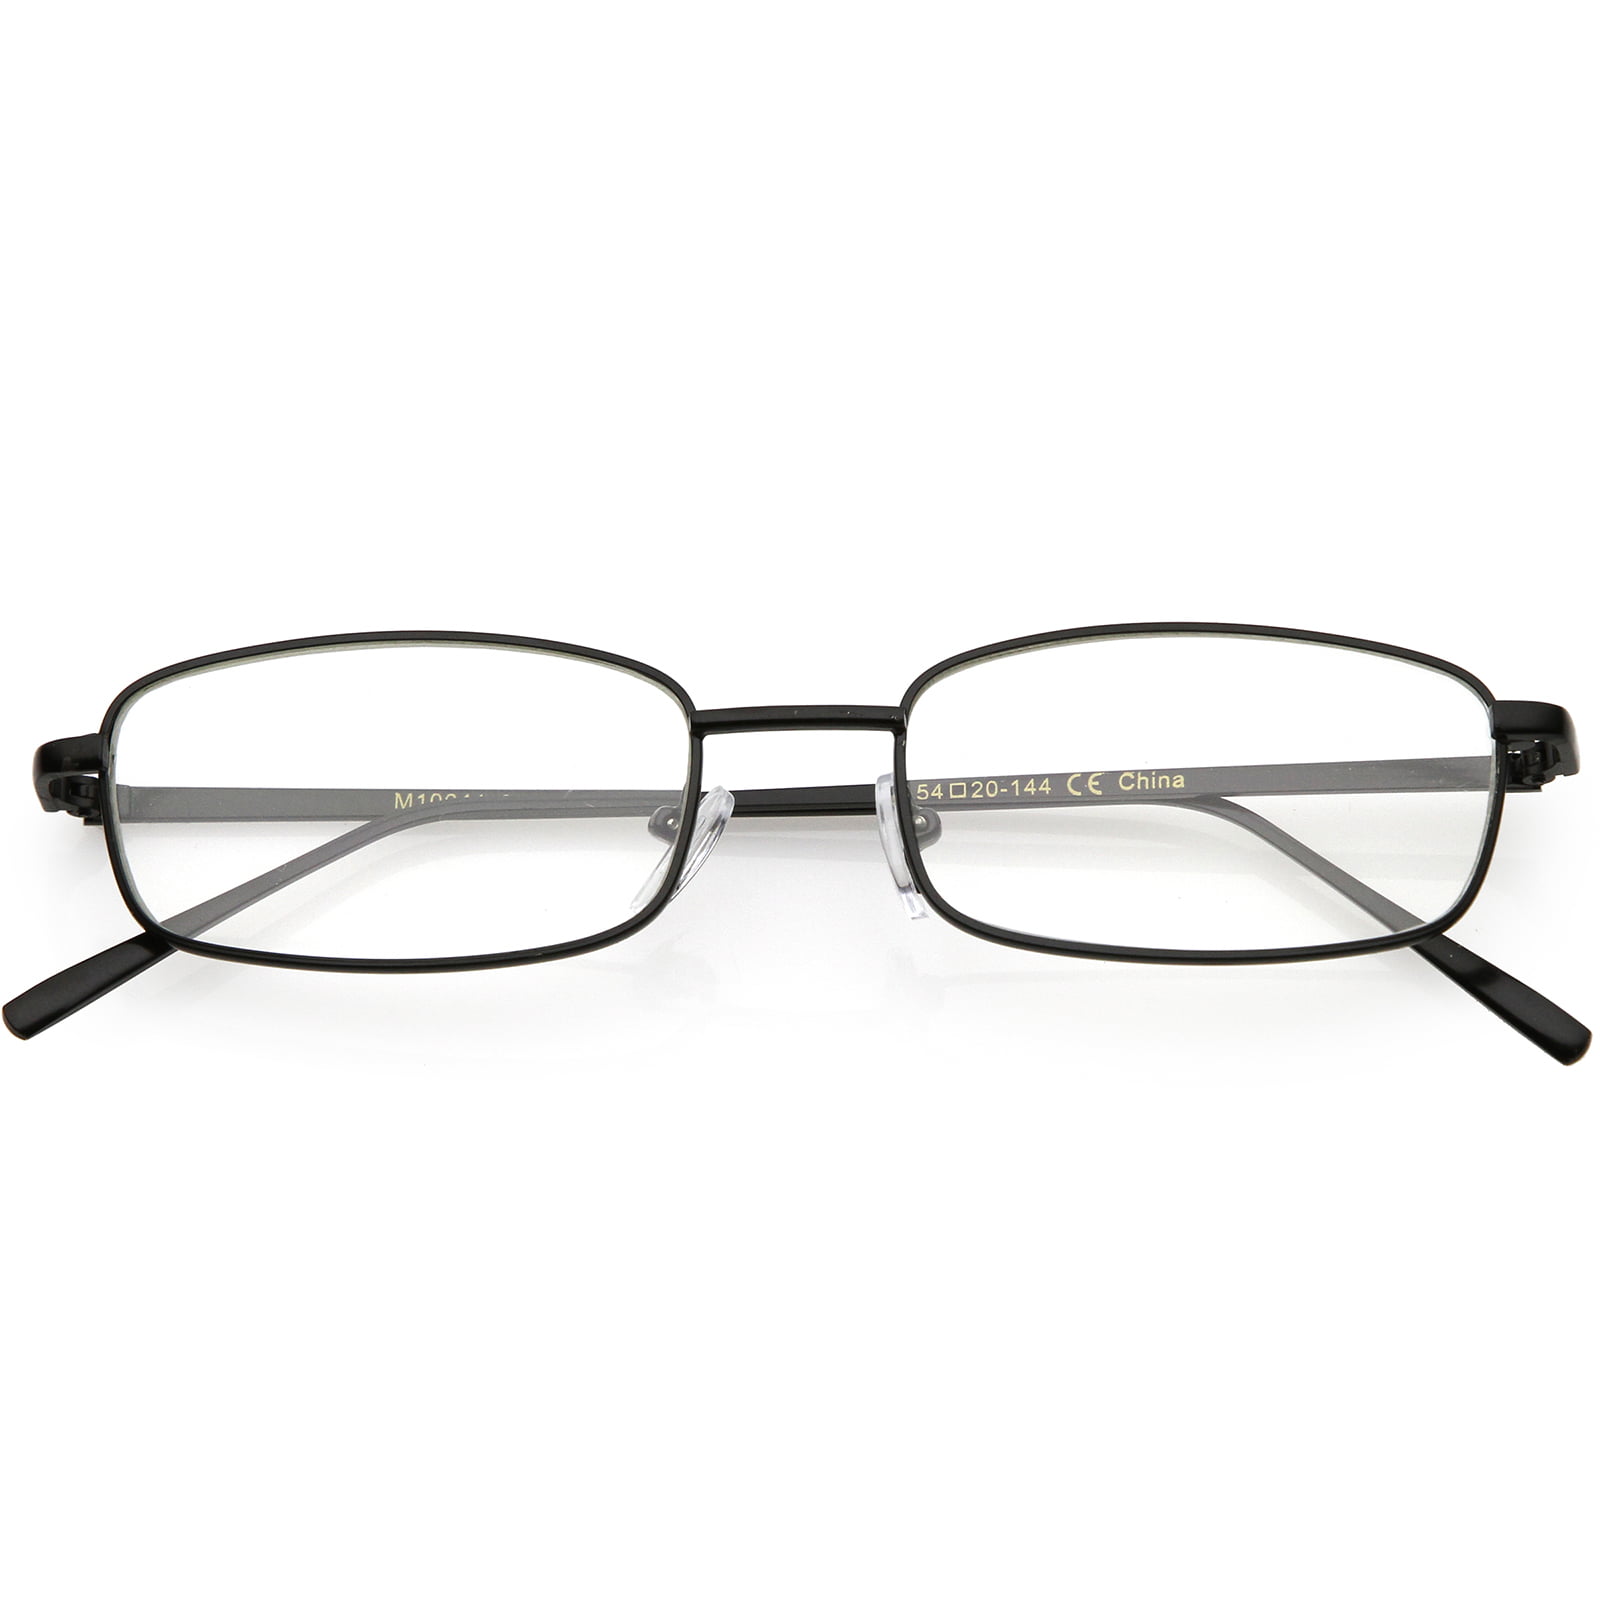 Classic Metal Rectangle Eyeglasses Slim Arms Clear Lens 52mm Black Clear